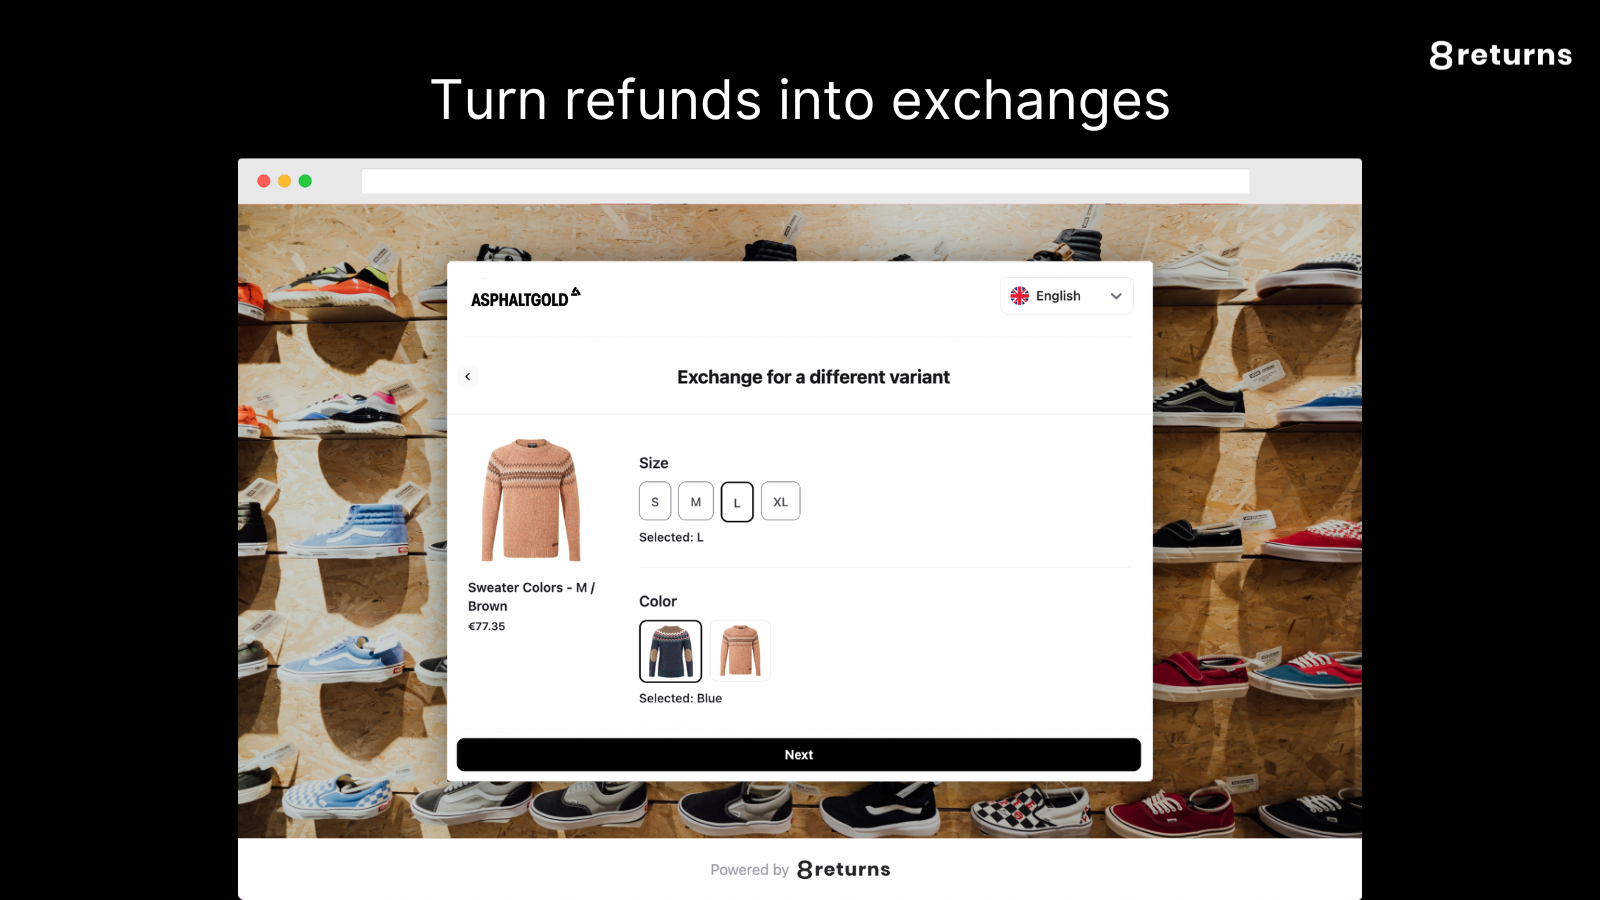 Turn refunds into exchanges